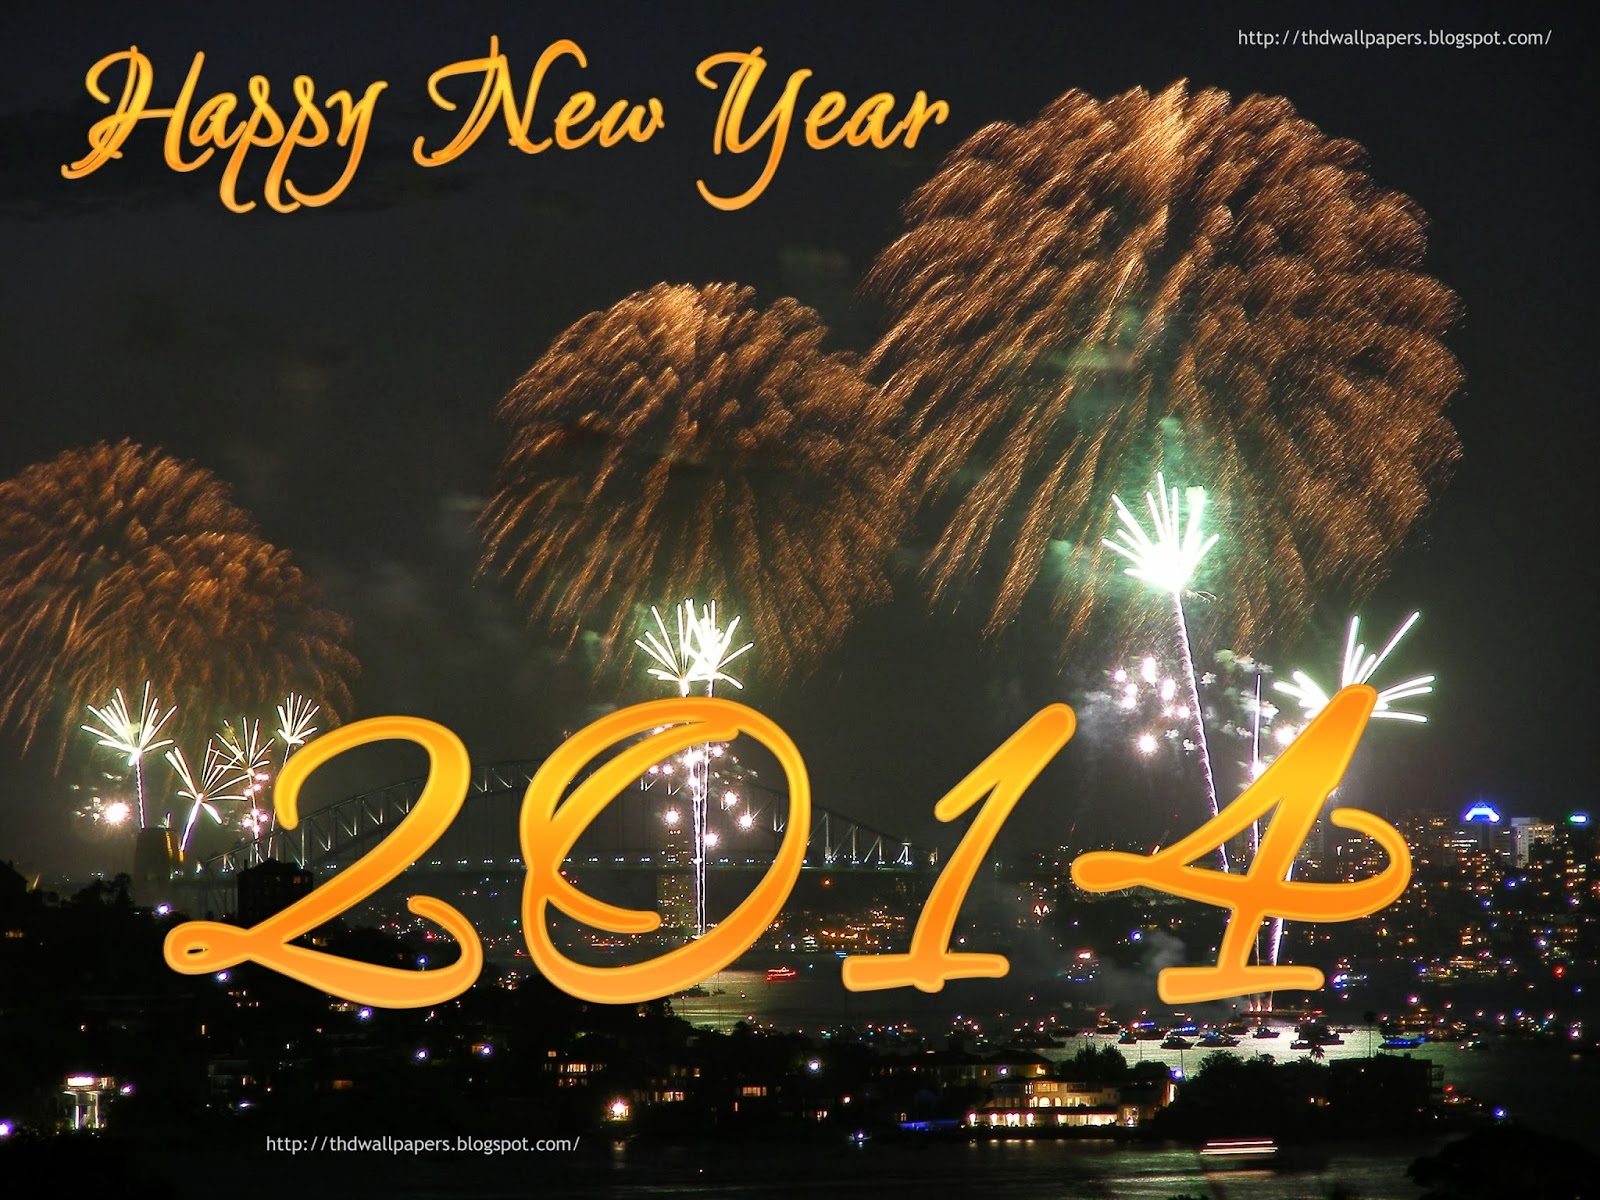 Happy New Years Eve 2014 also 2014 new years' blessings from ...